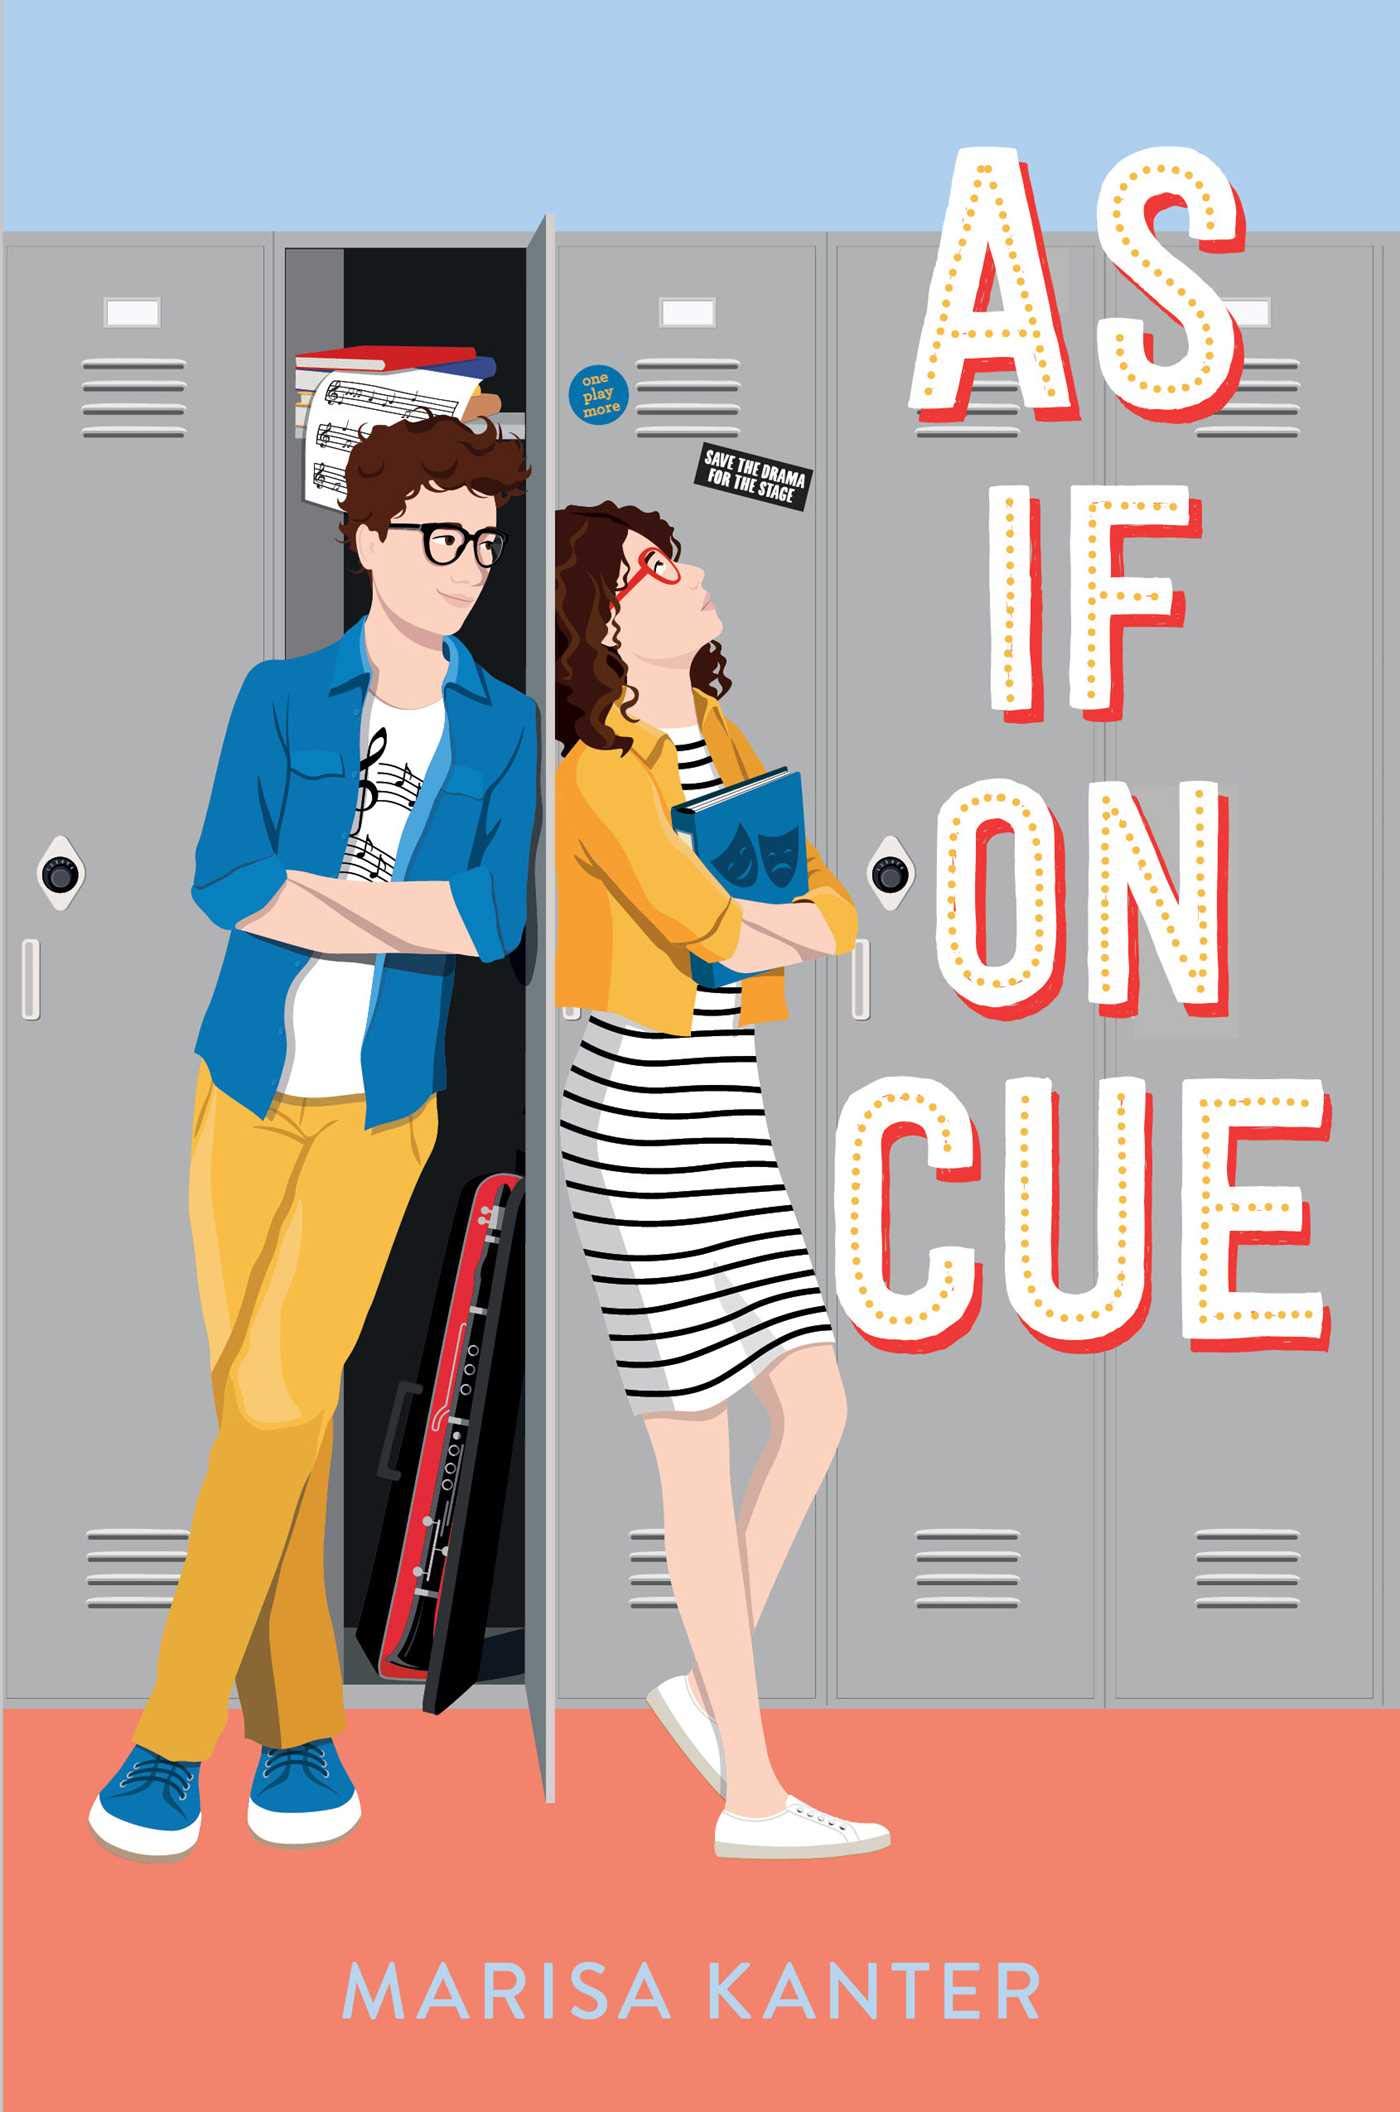 Image for "As If on Cue"